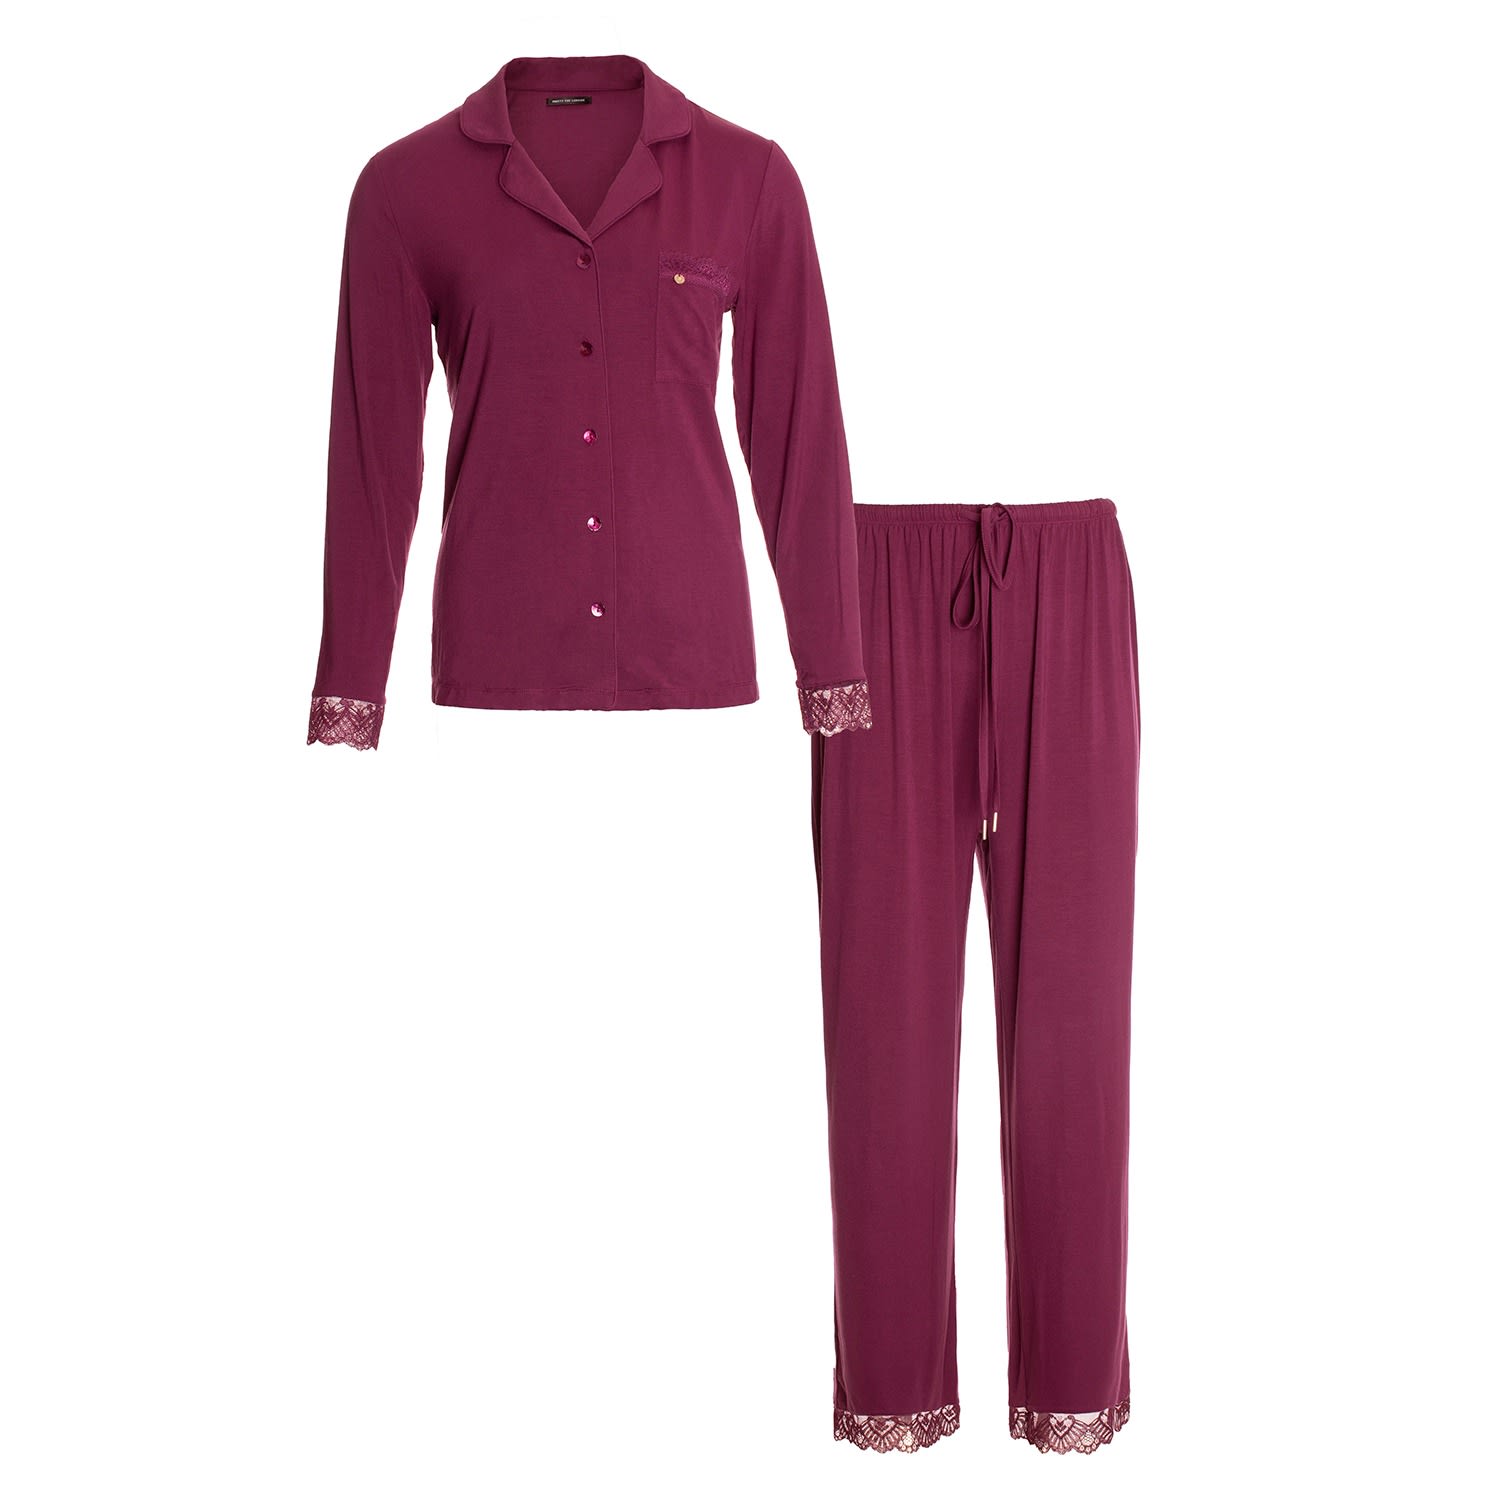 Pretty You Women's Red Bamboo Lace Pyjama Set In Bordeaux